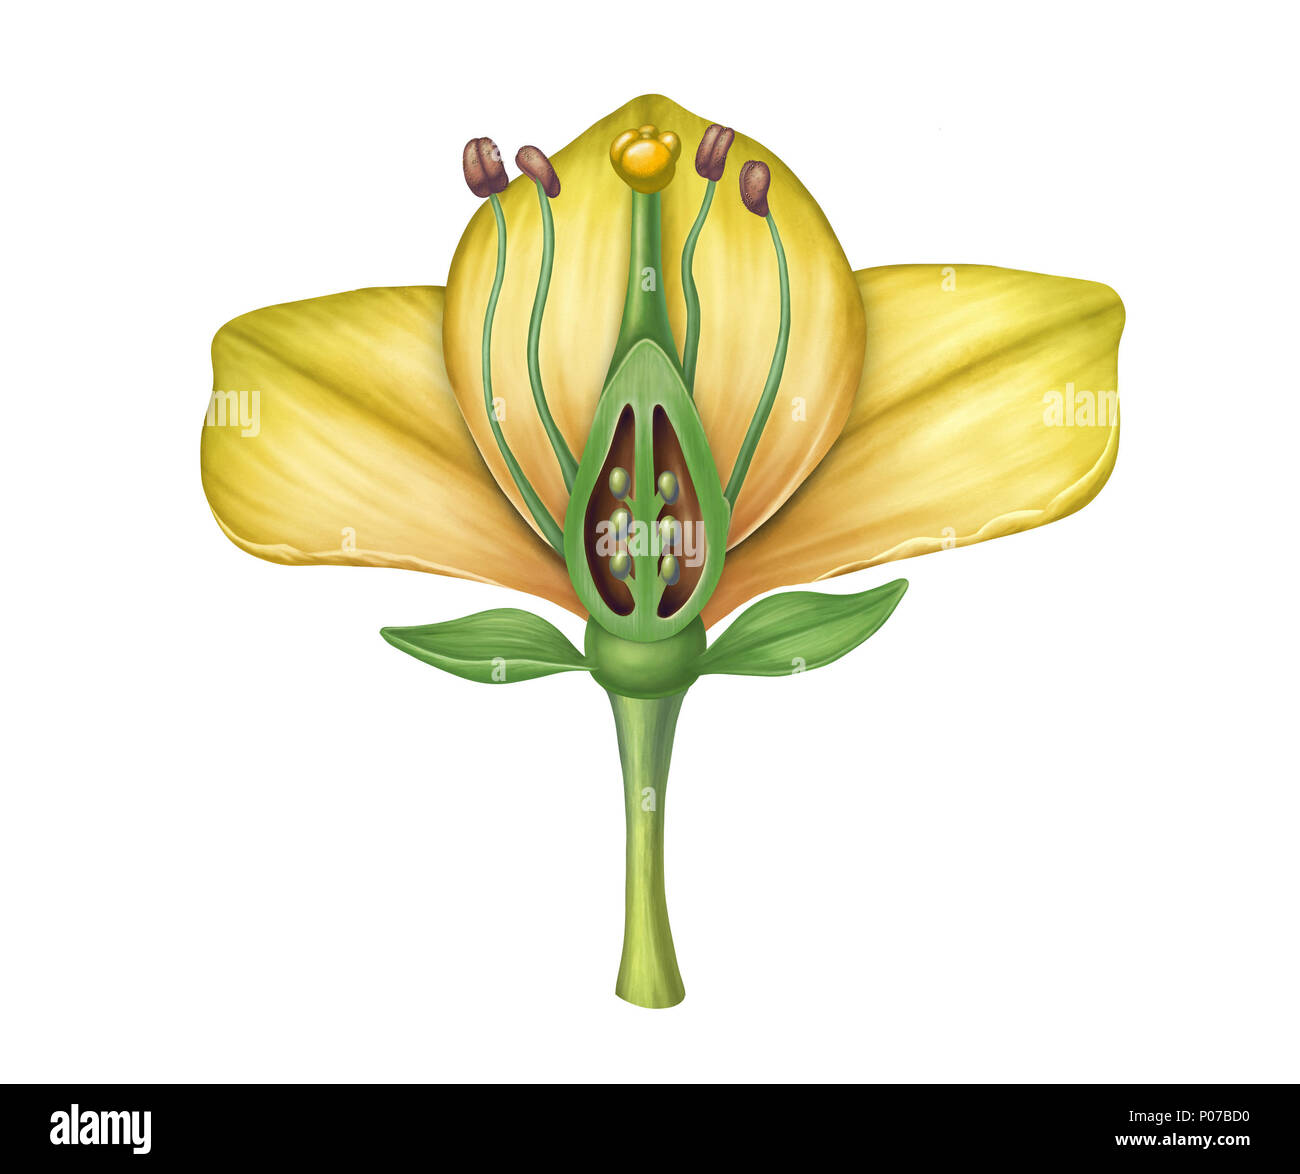 Cross section diagram showing the different parts of a flower. Digital illustration. Stock Photo